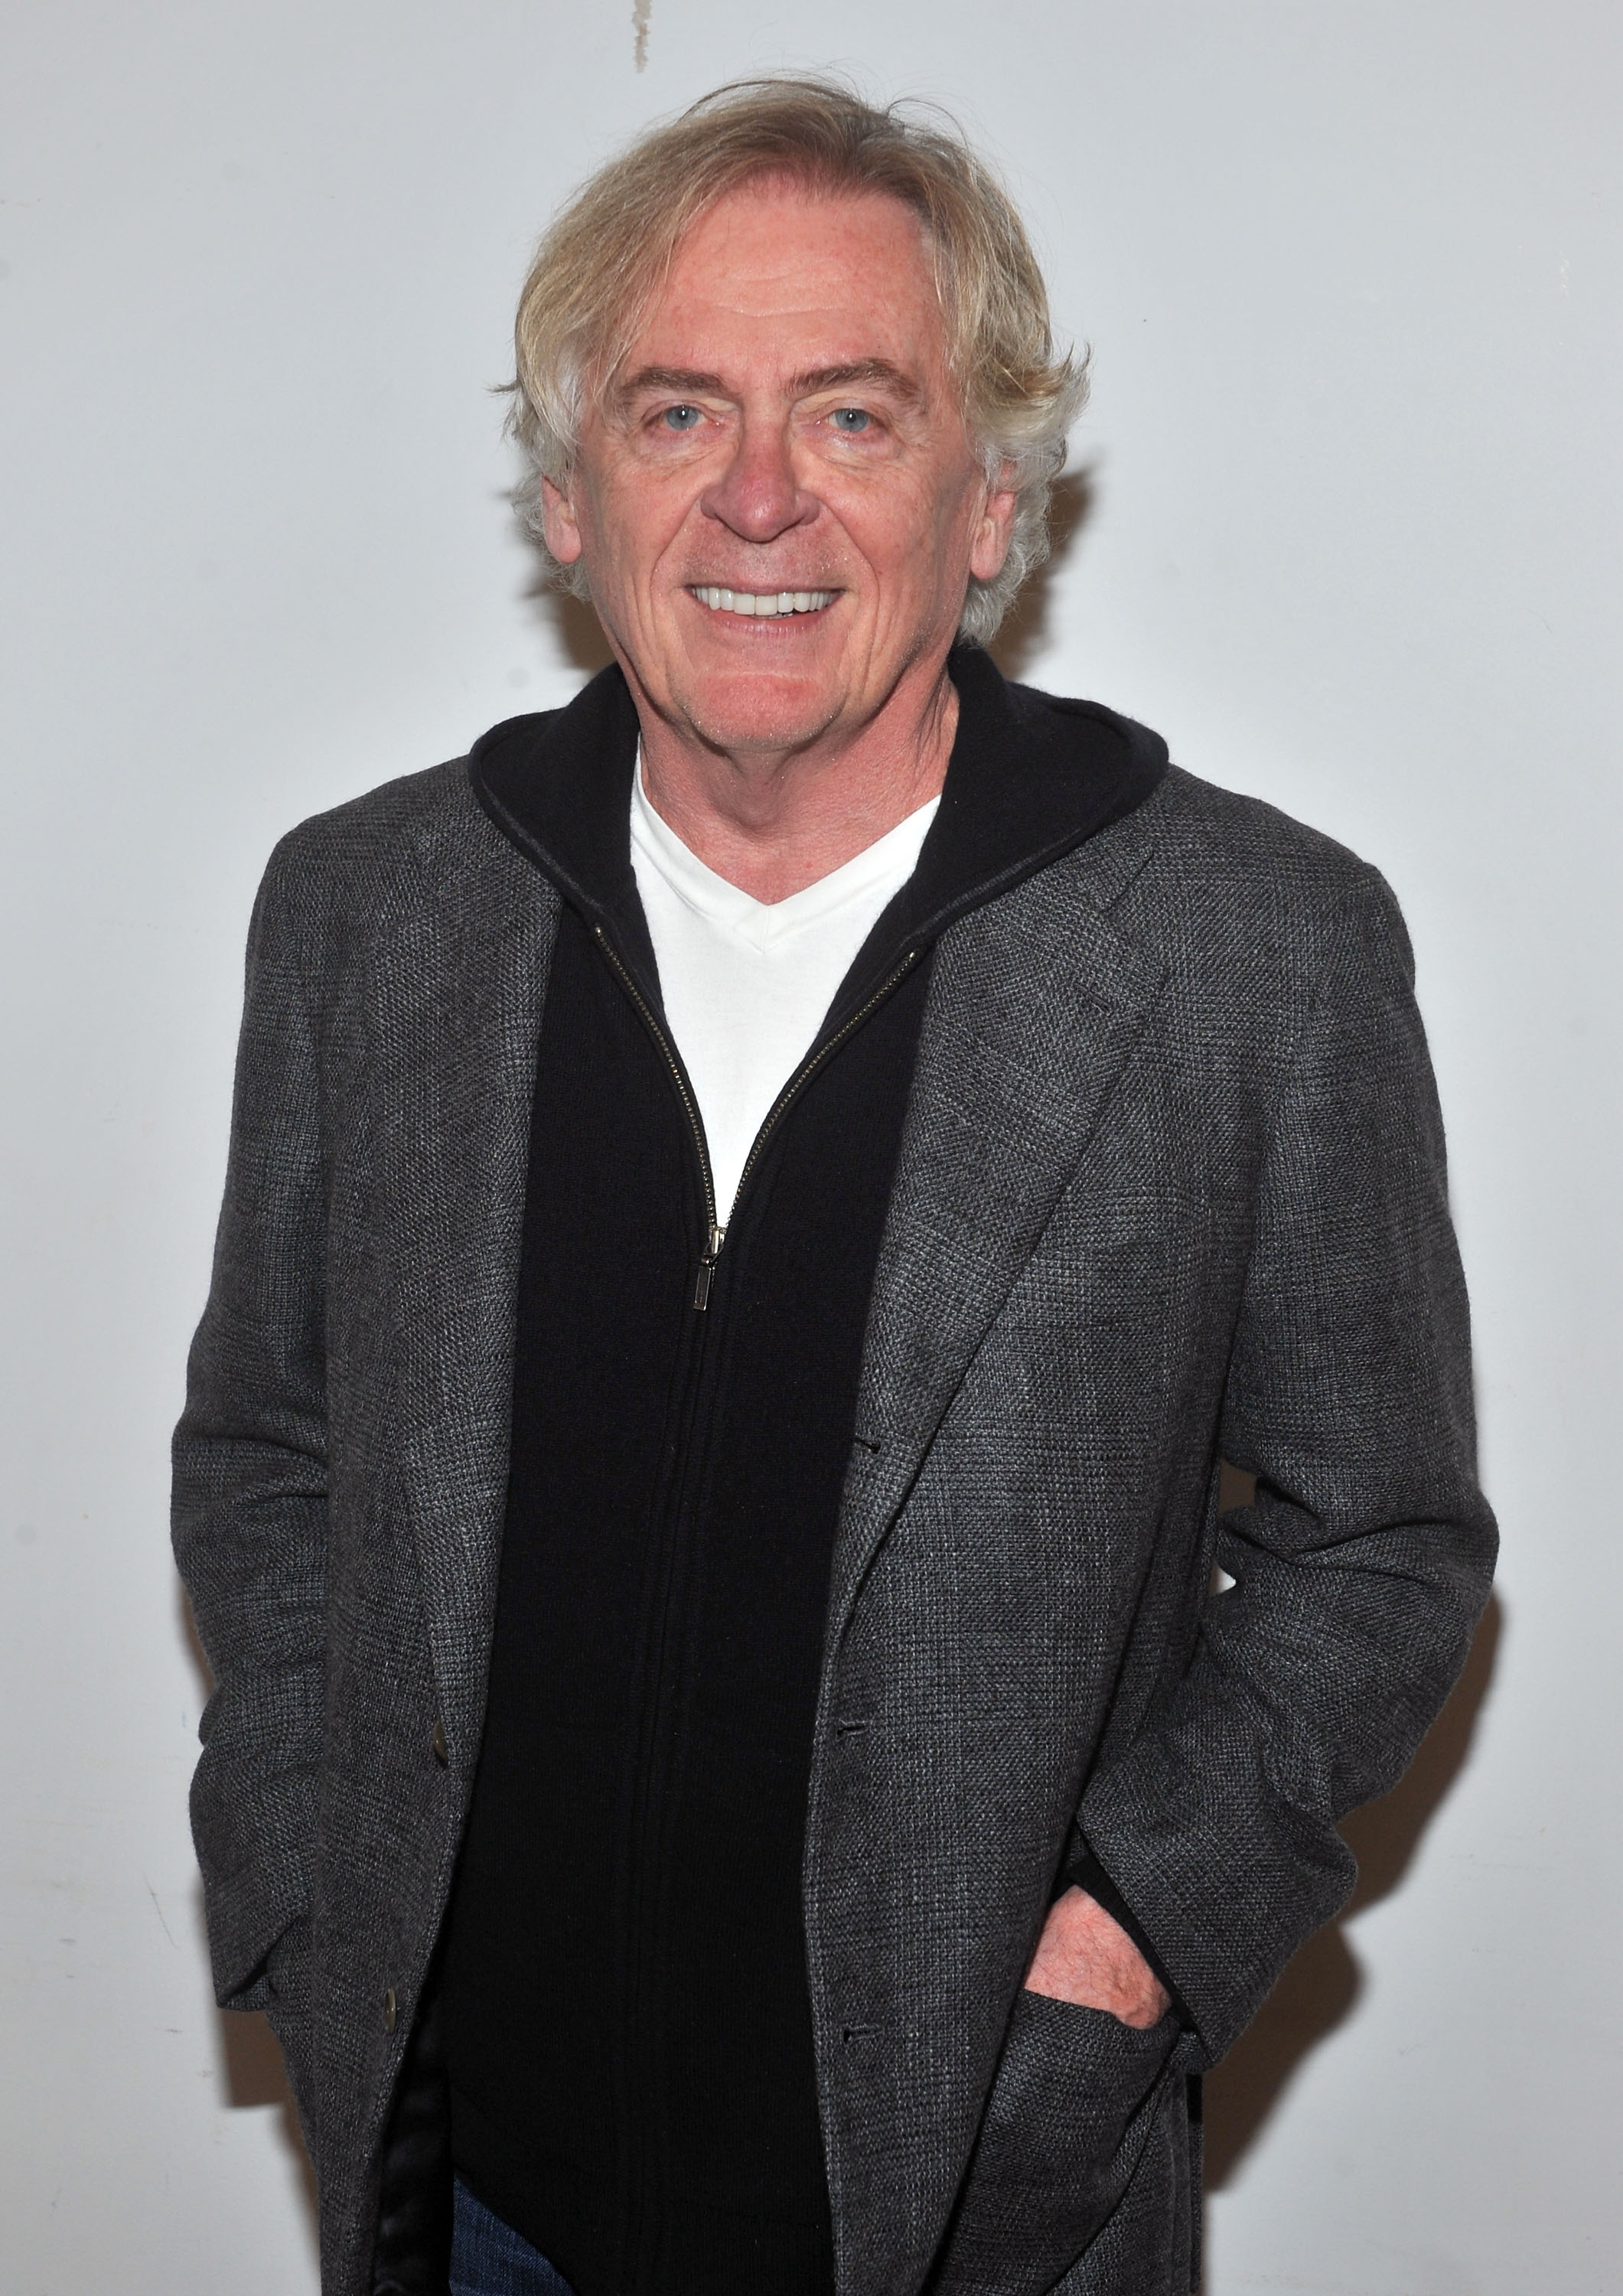 Daniel Davis at the "Black Tie" cast photo call on December 21, 2010 | Photo: Getty Images